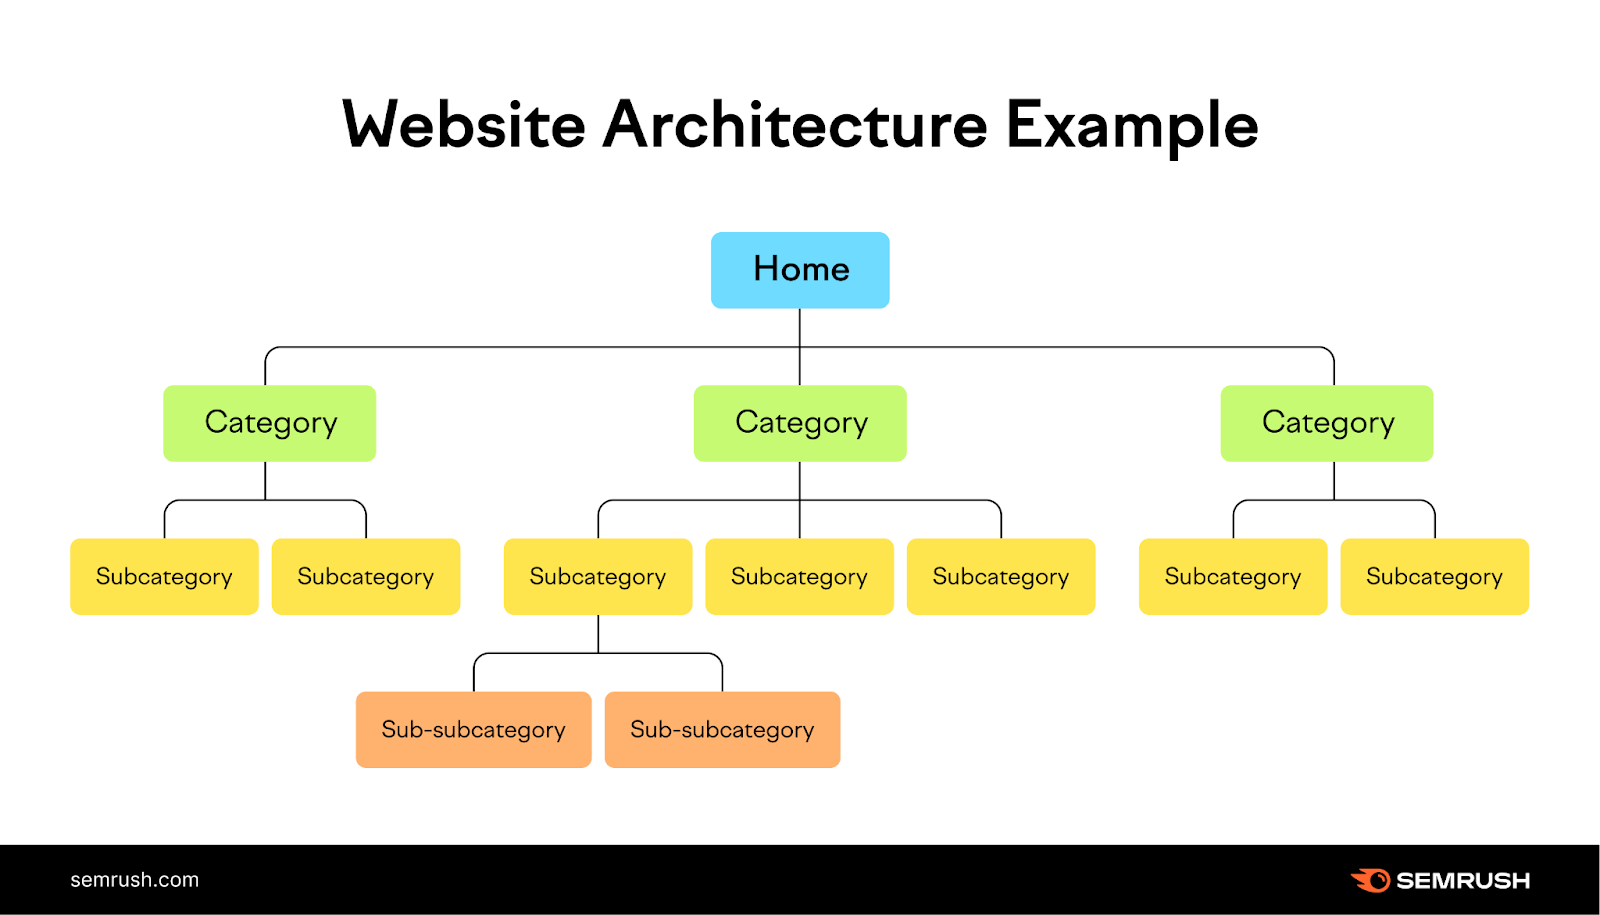 An infographic showing an example of an organized site architecture